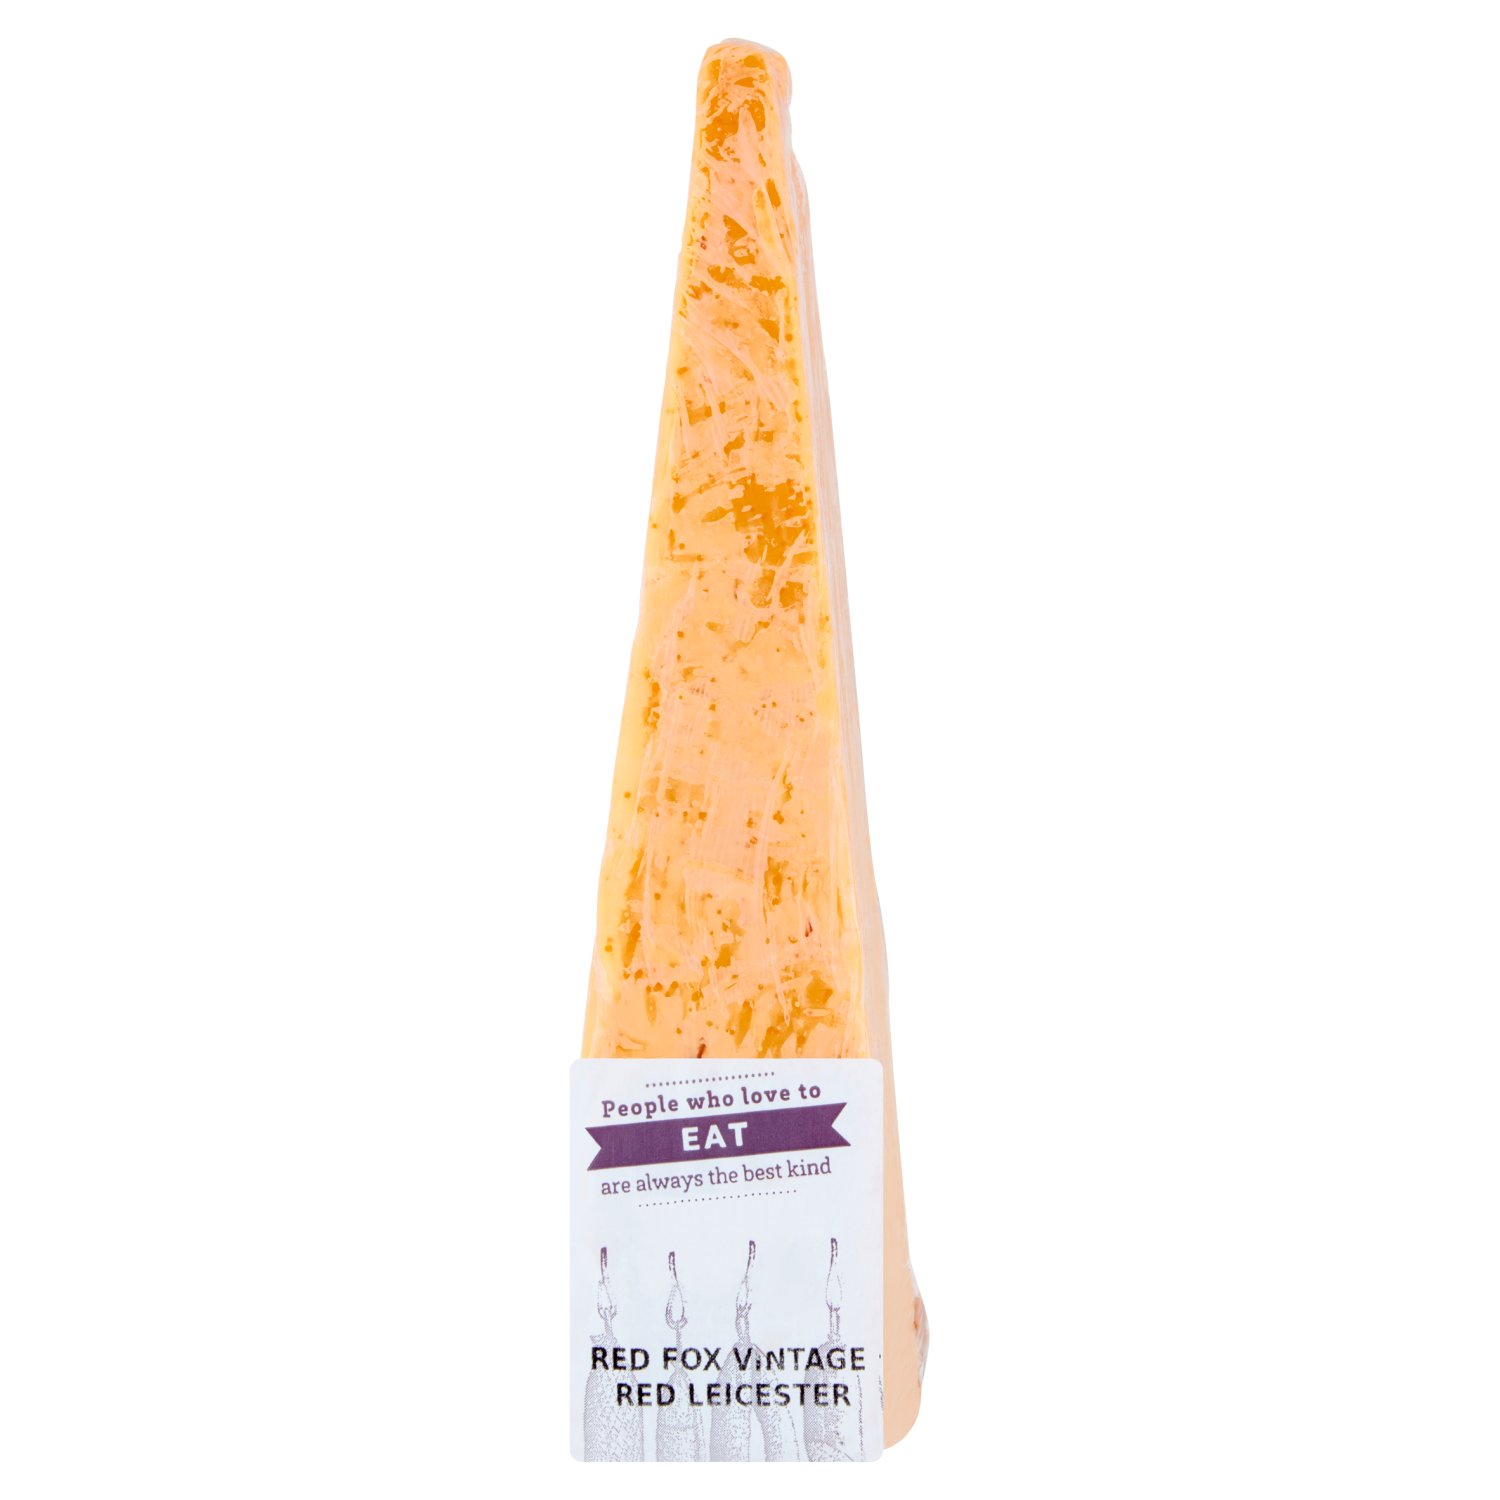 Red Fox Vintage Red Leicester (1 kg)